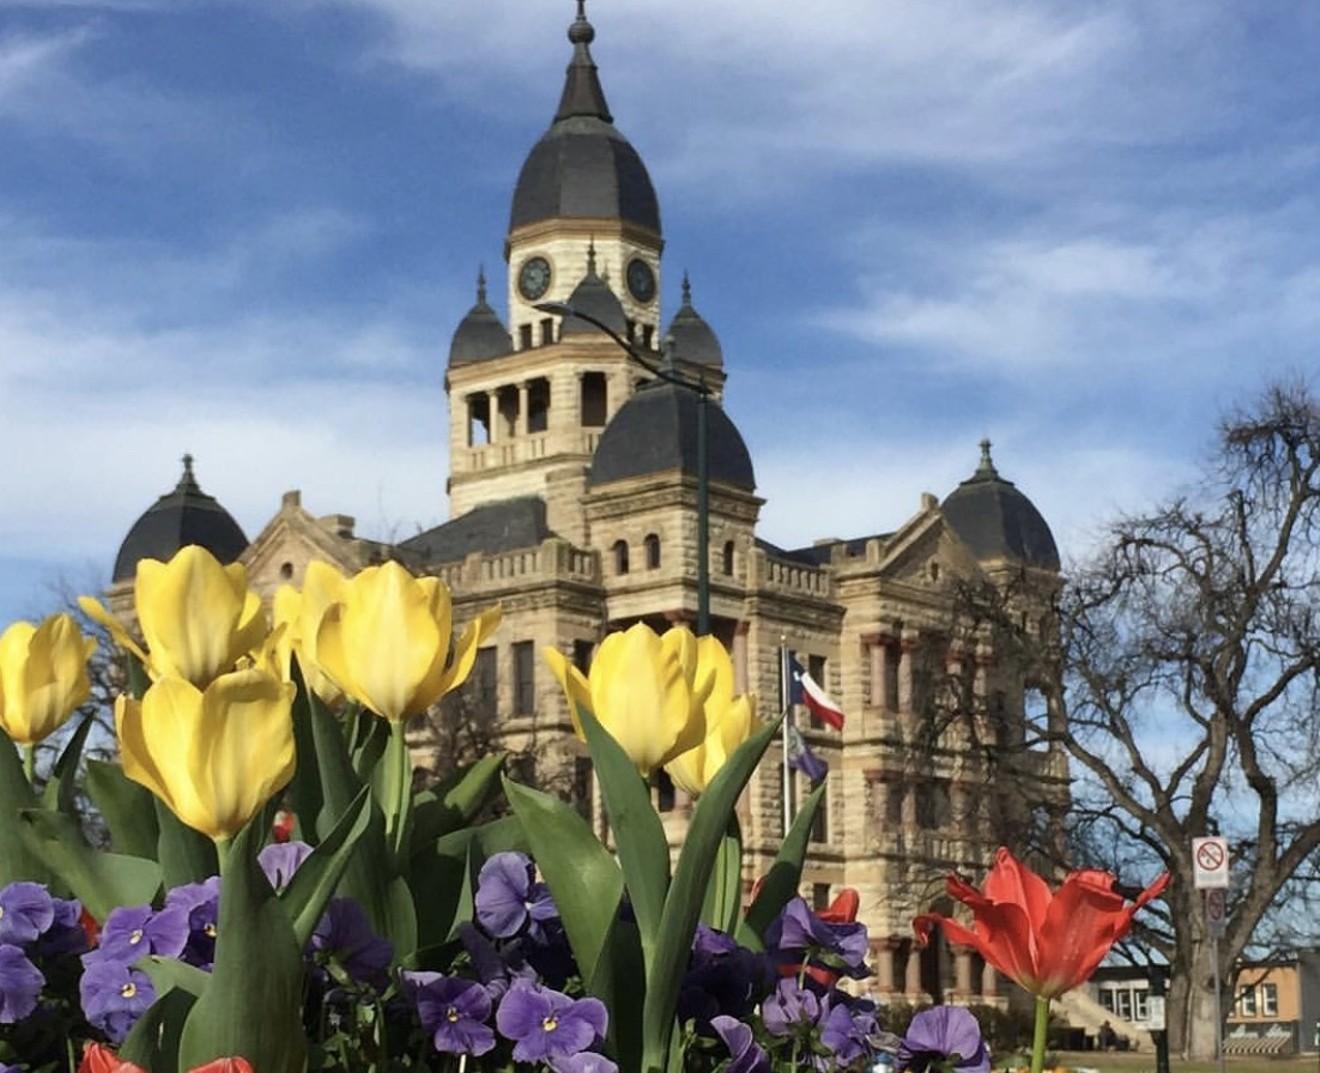 Denton is a family-friendly town worthy of a day trip from Big D.